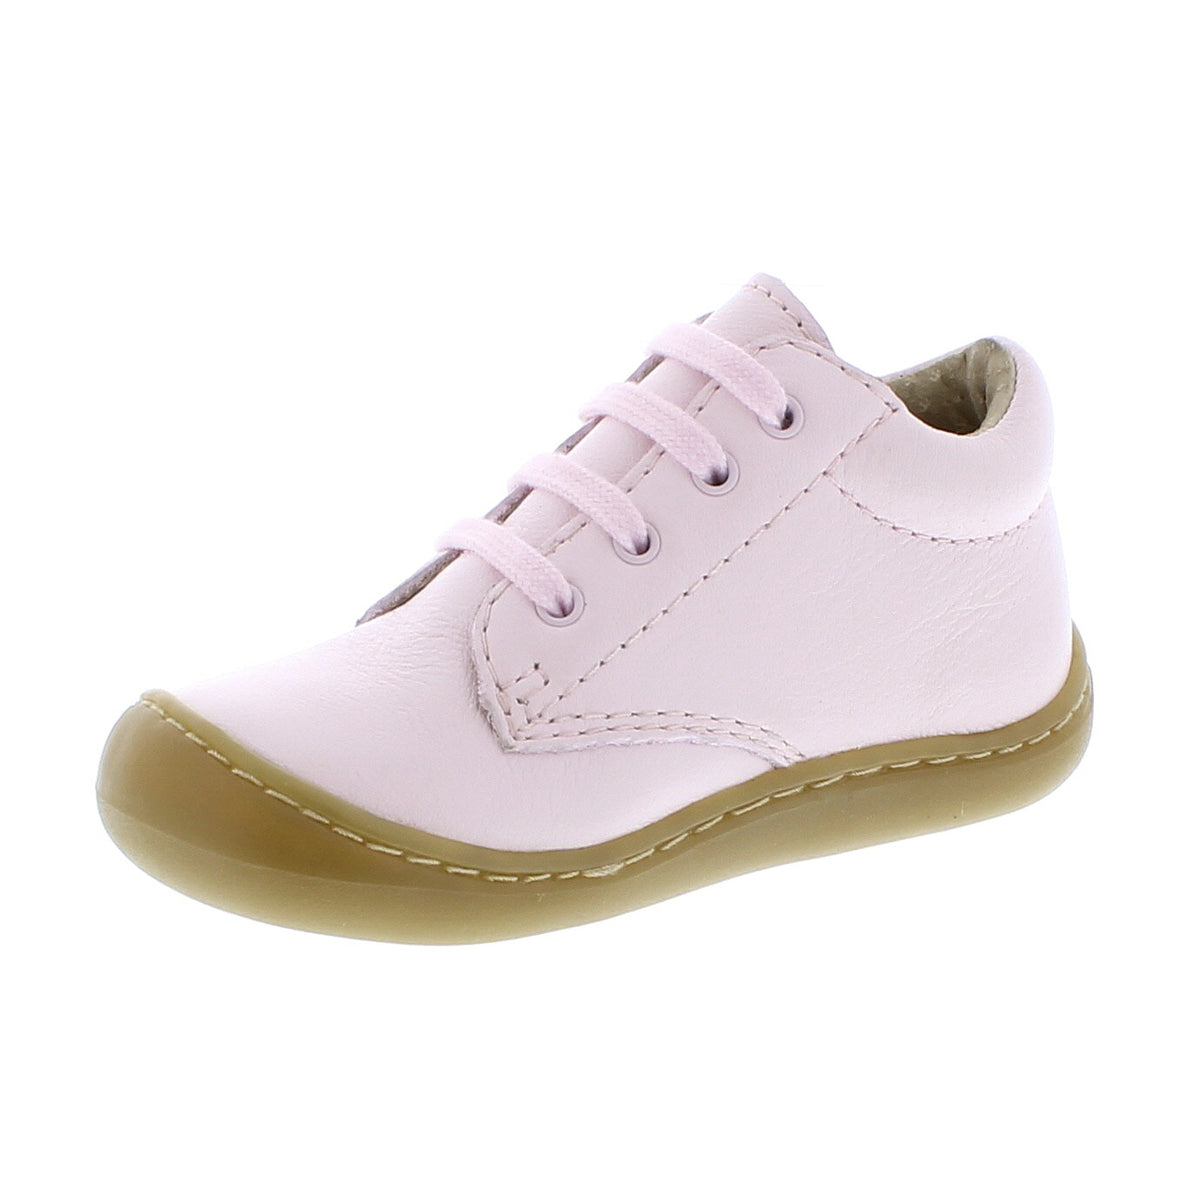 Reagan Lace Bootie - Rose Pink Leather – Tonka Shoe Box | Little Feet ...